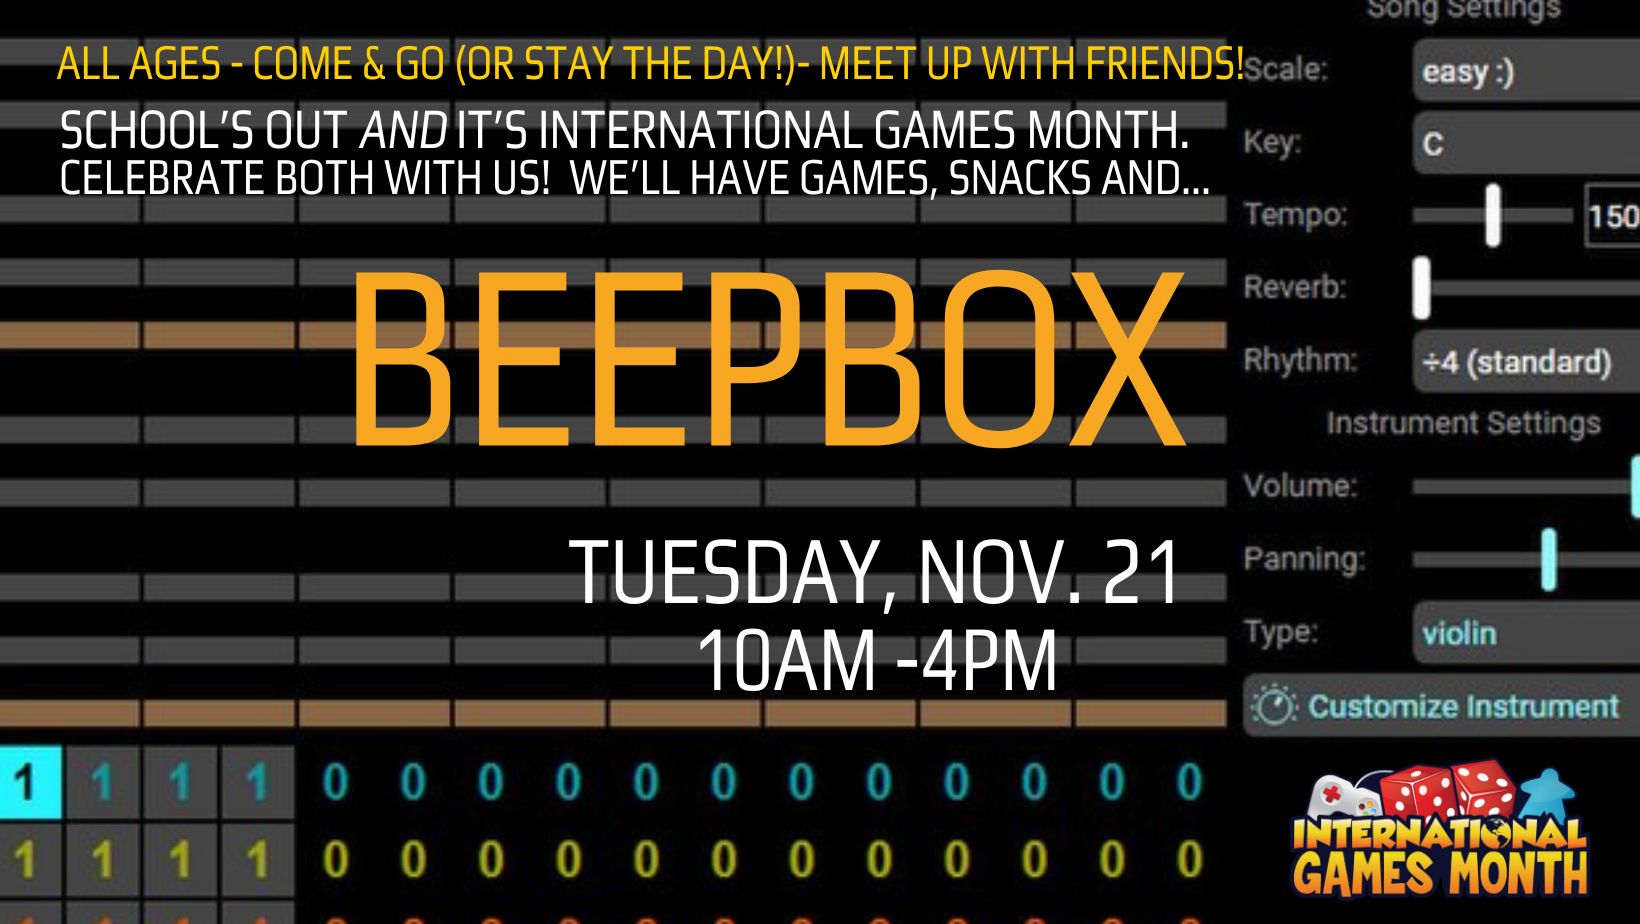 Image includes Beepbox background and International Games Month logo